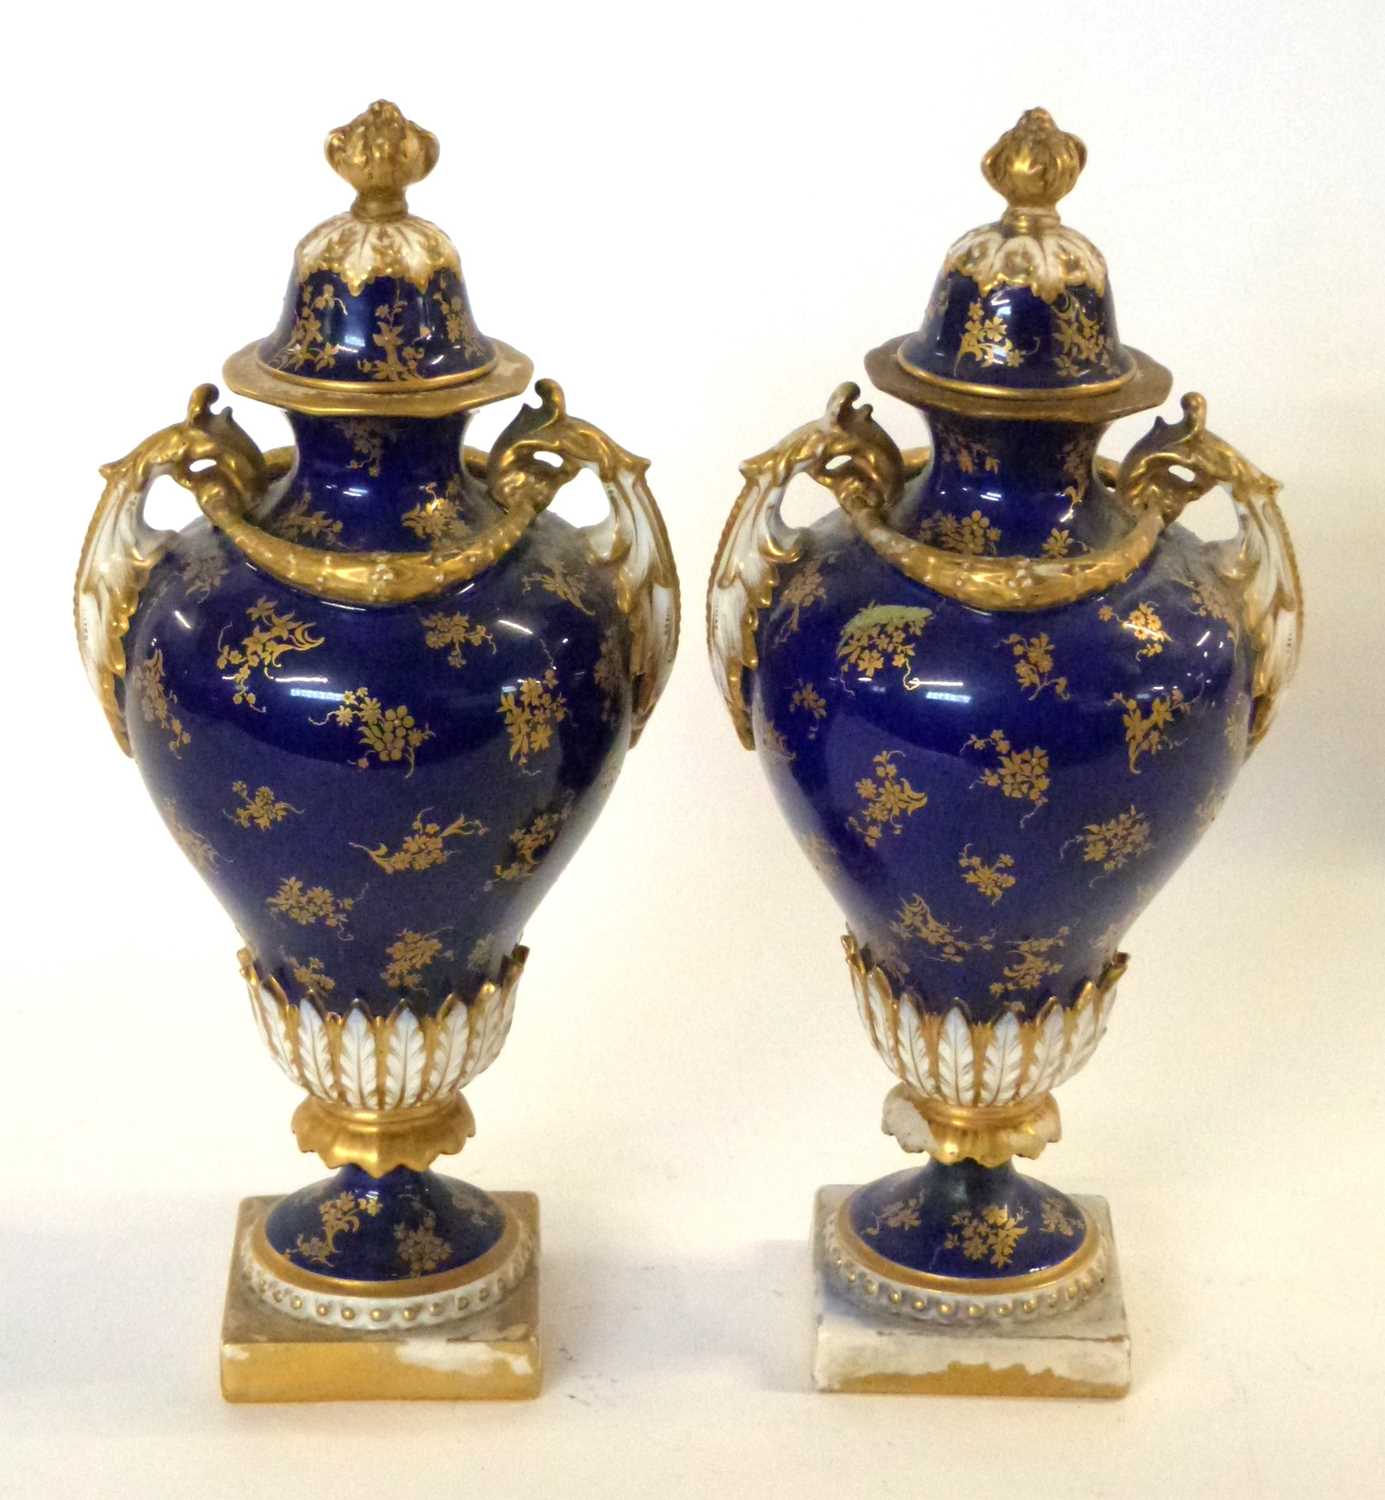 Royal Worcester Fruit Vases by Chivers - Image 2 of 16